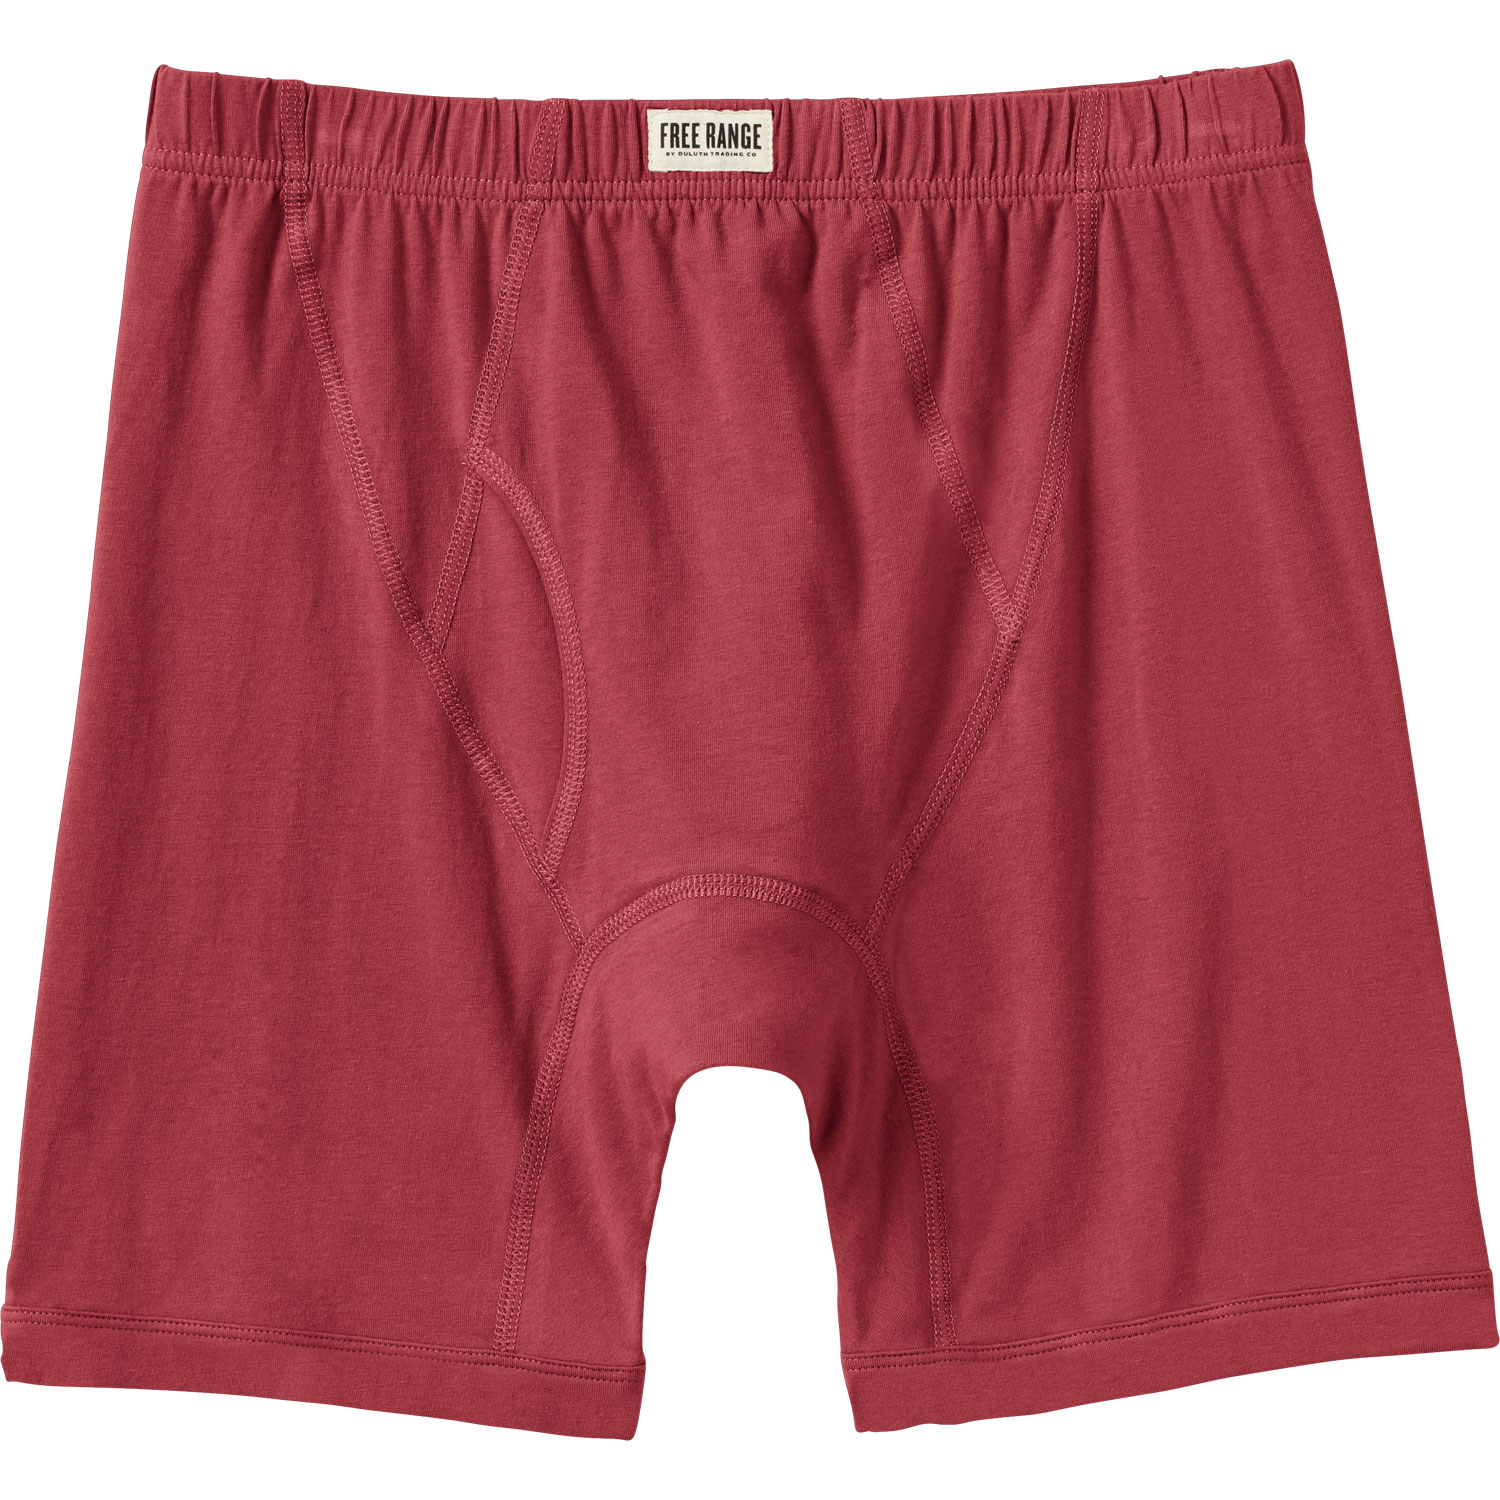 Duluth Trading Co Mens Boxer Briefs 3 piece Gift Set 32816 4XL 